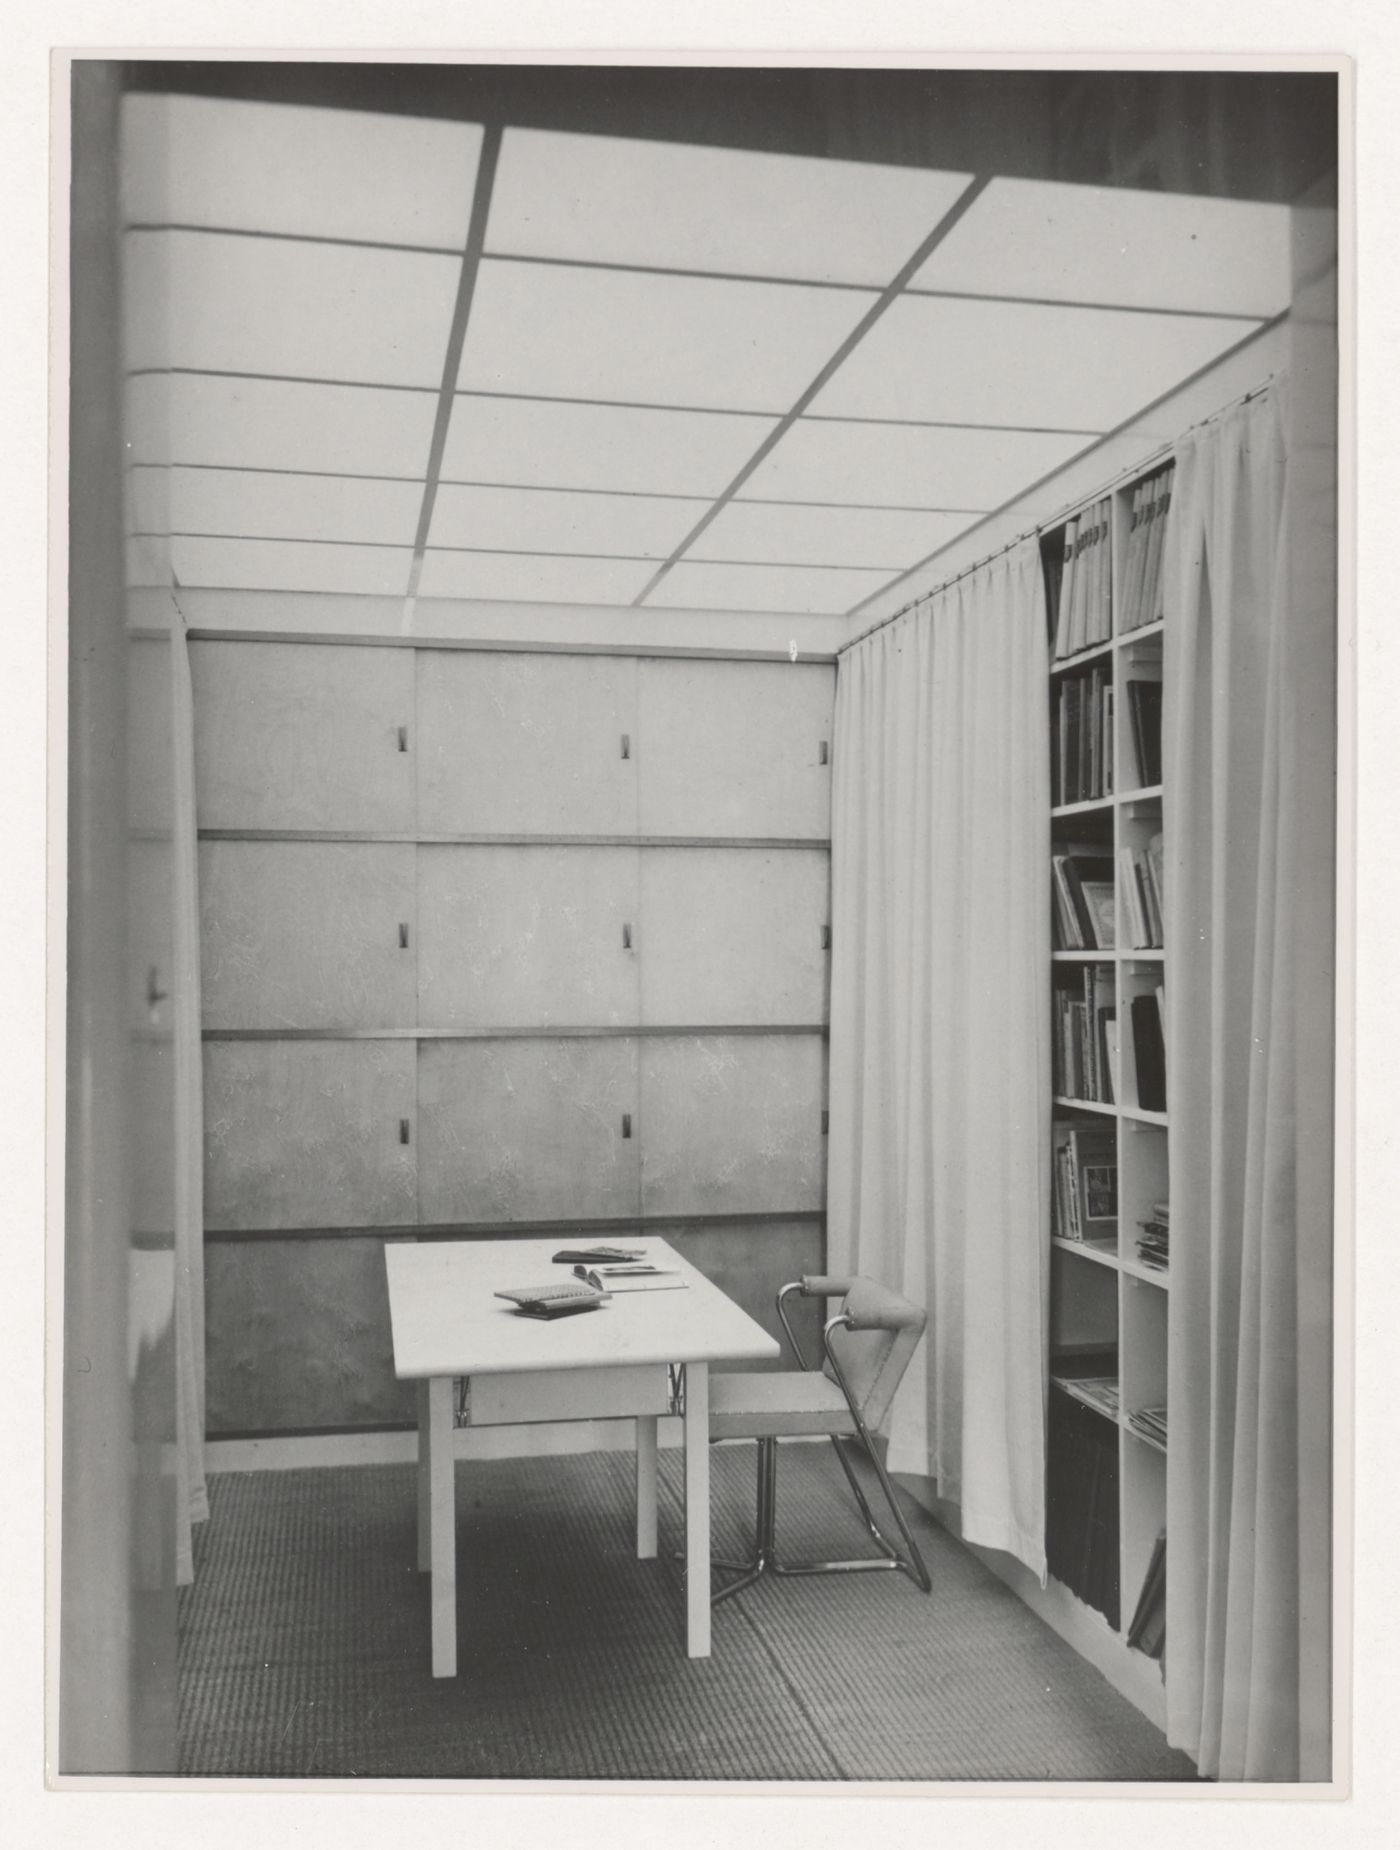 Interior view of the library of Hannema House I showing an elbow chair designed by J.J.P. Oud, a dropleaf table and built-in curtained bookshelves, Rotterdam, Netherlands